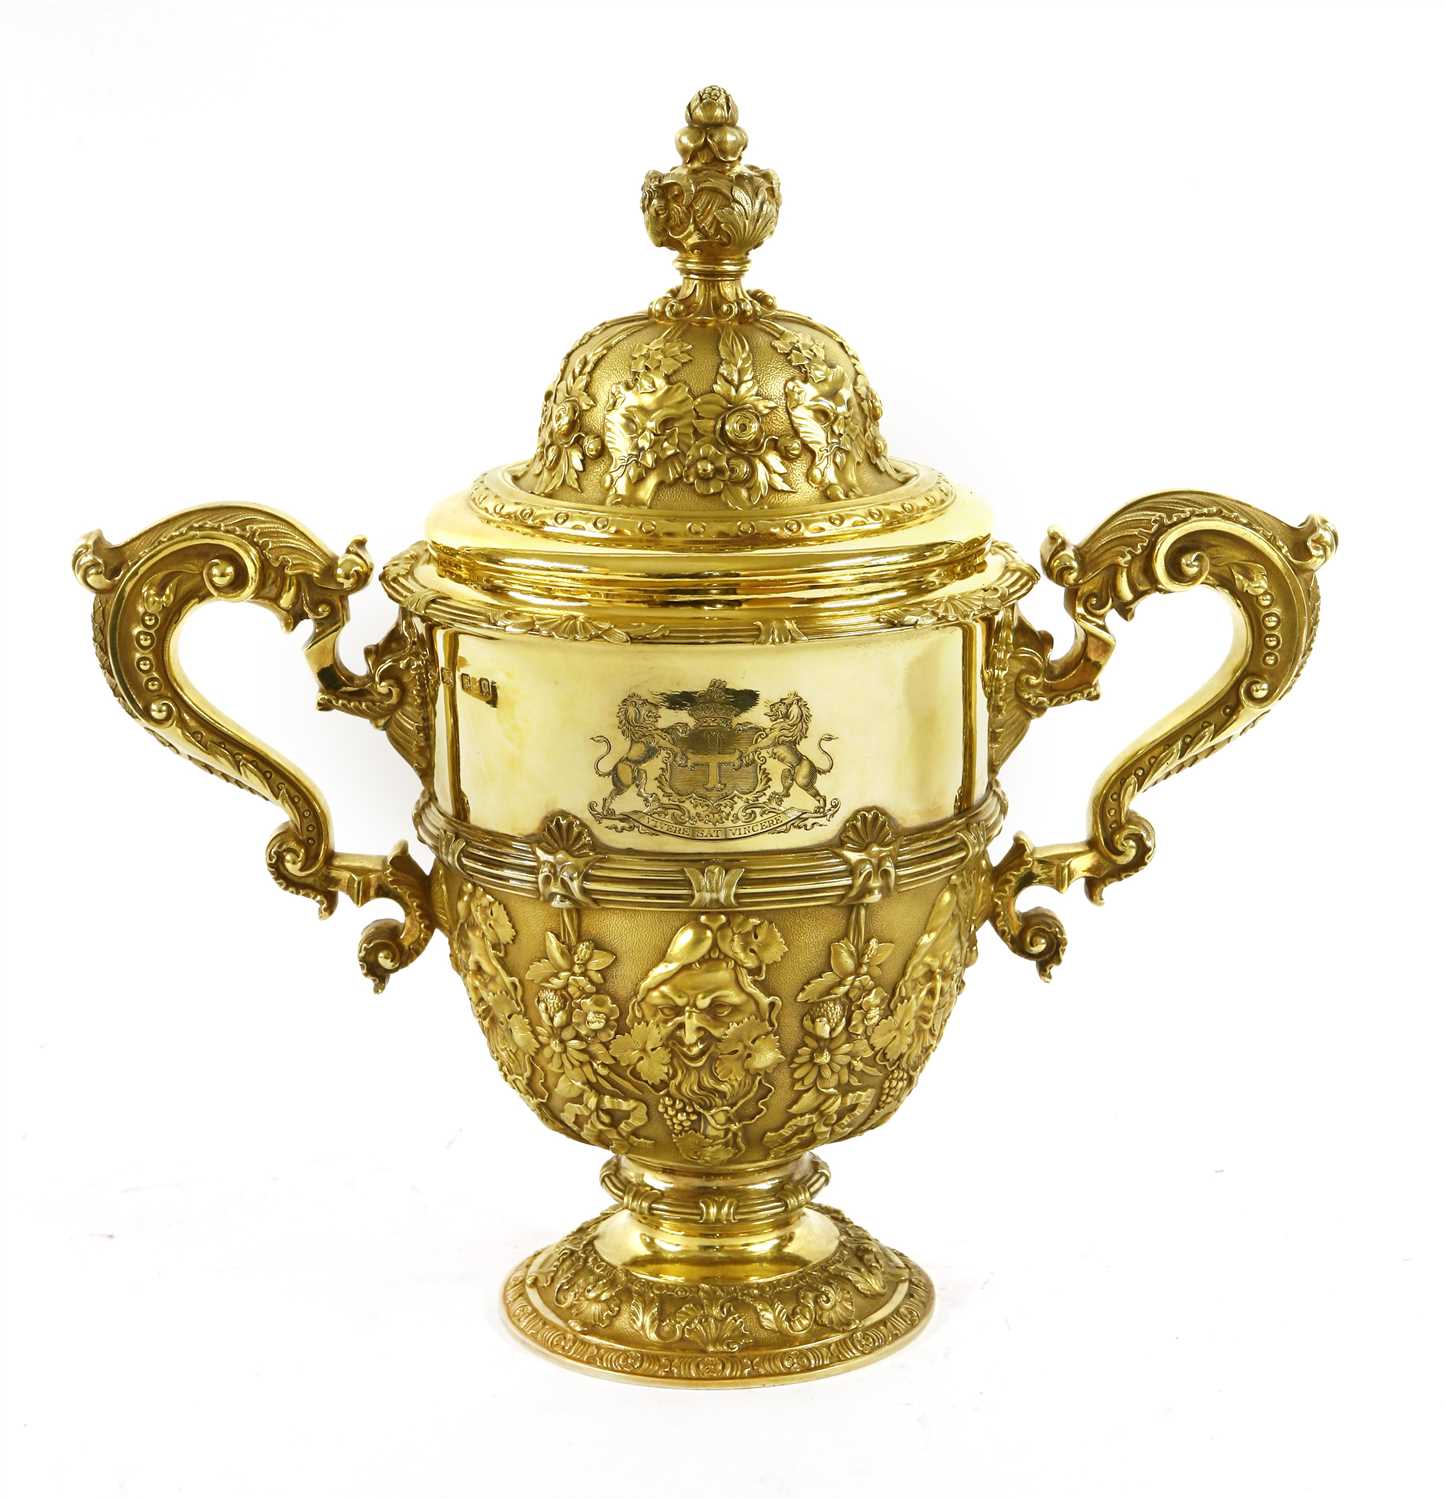 Lot 122 - The Waterloo Cup